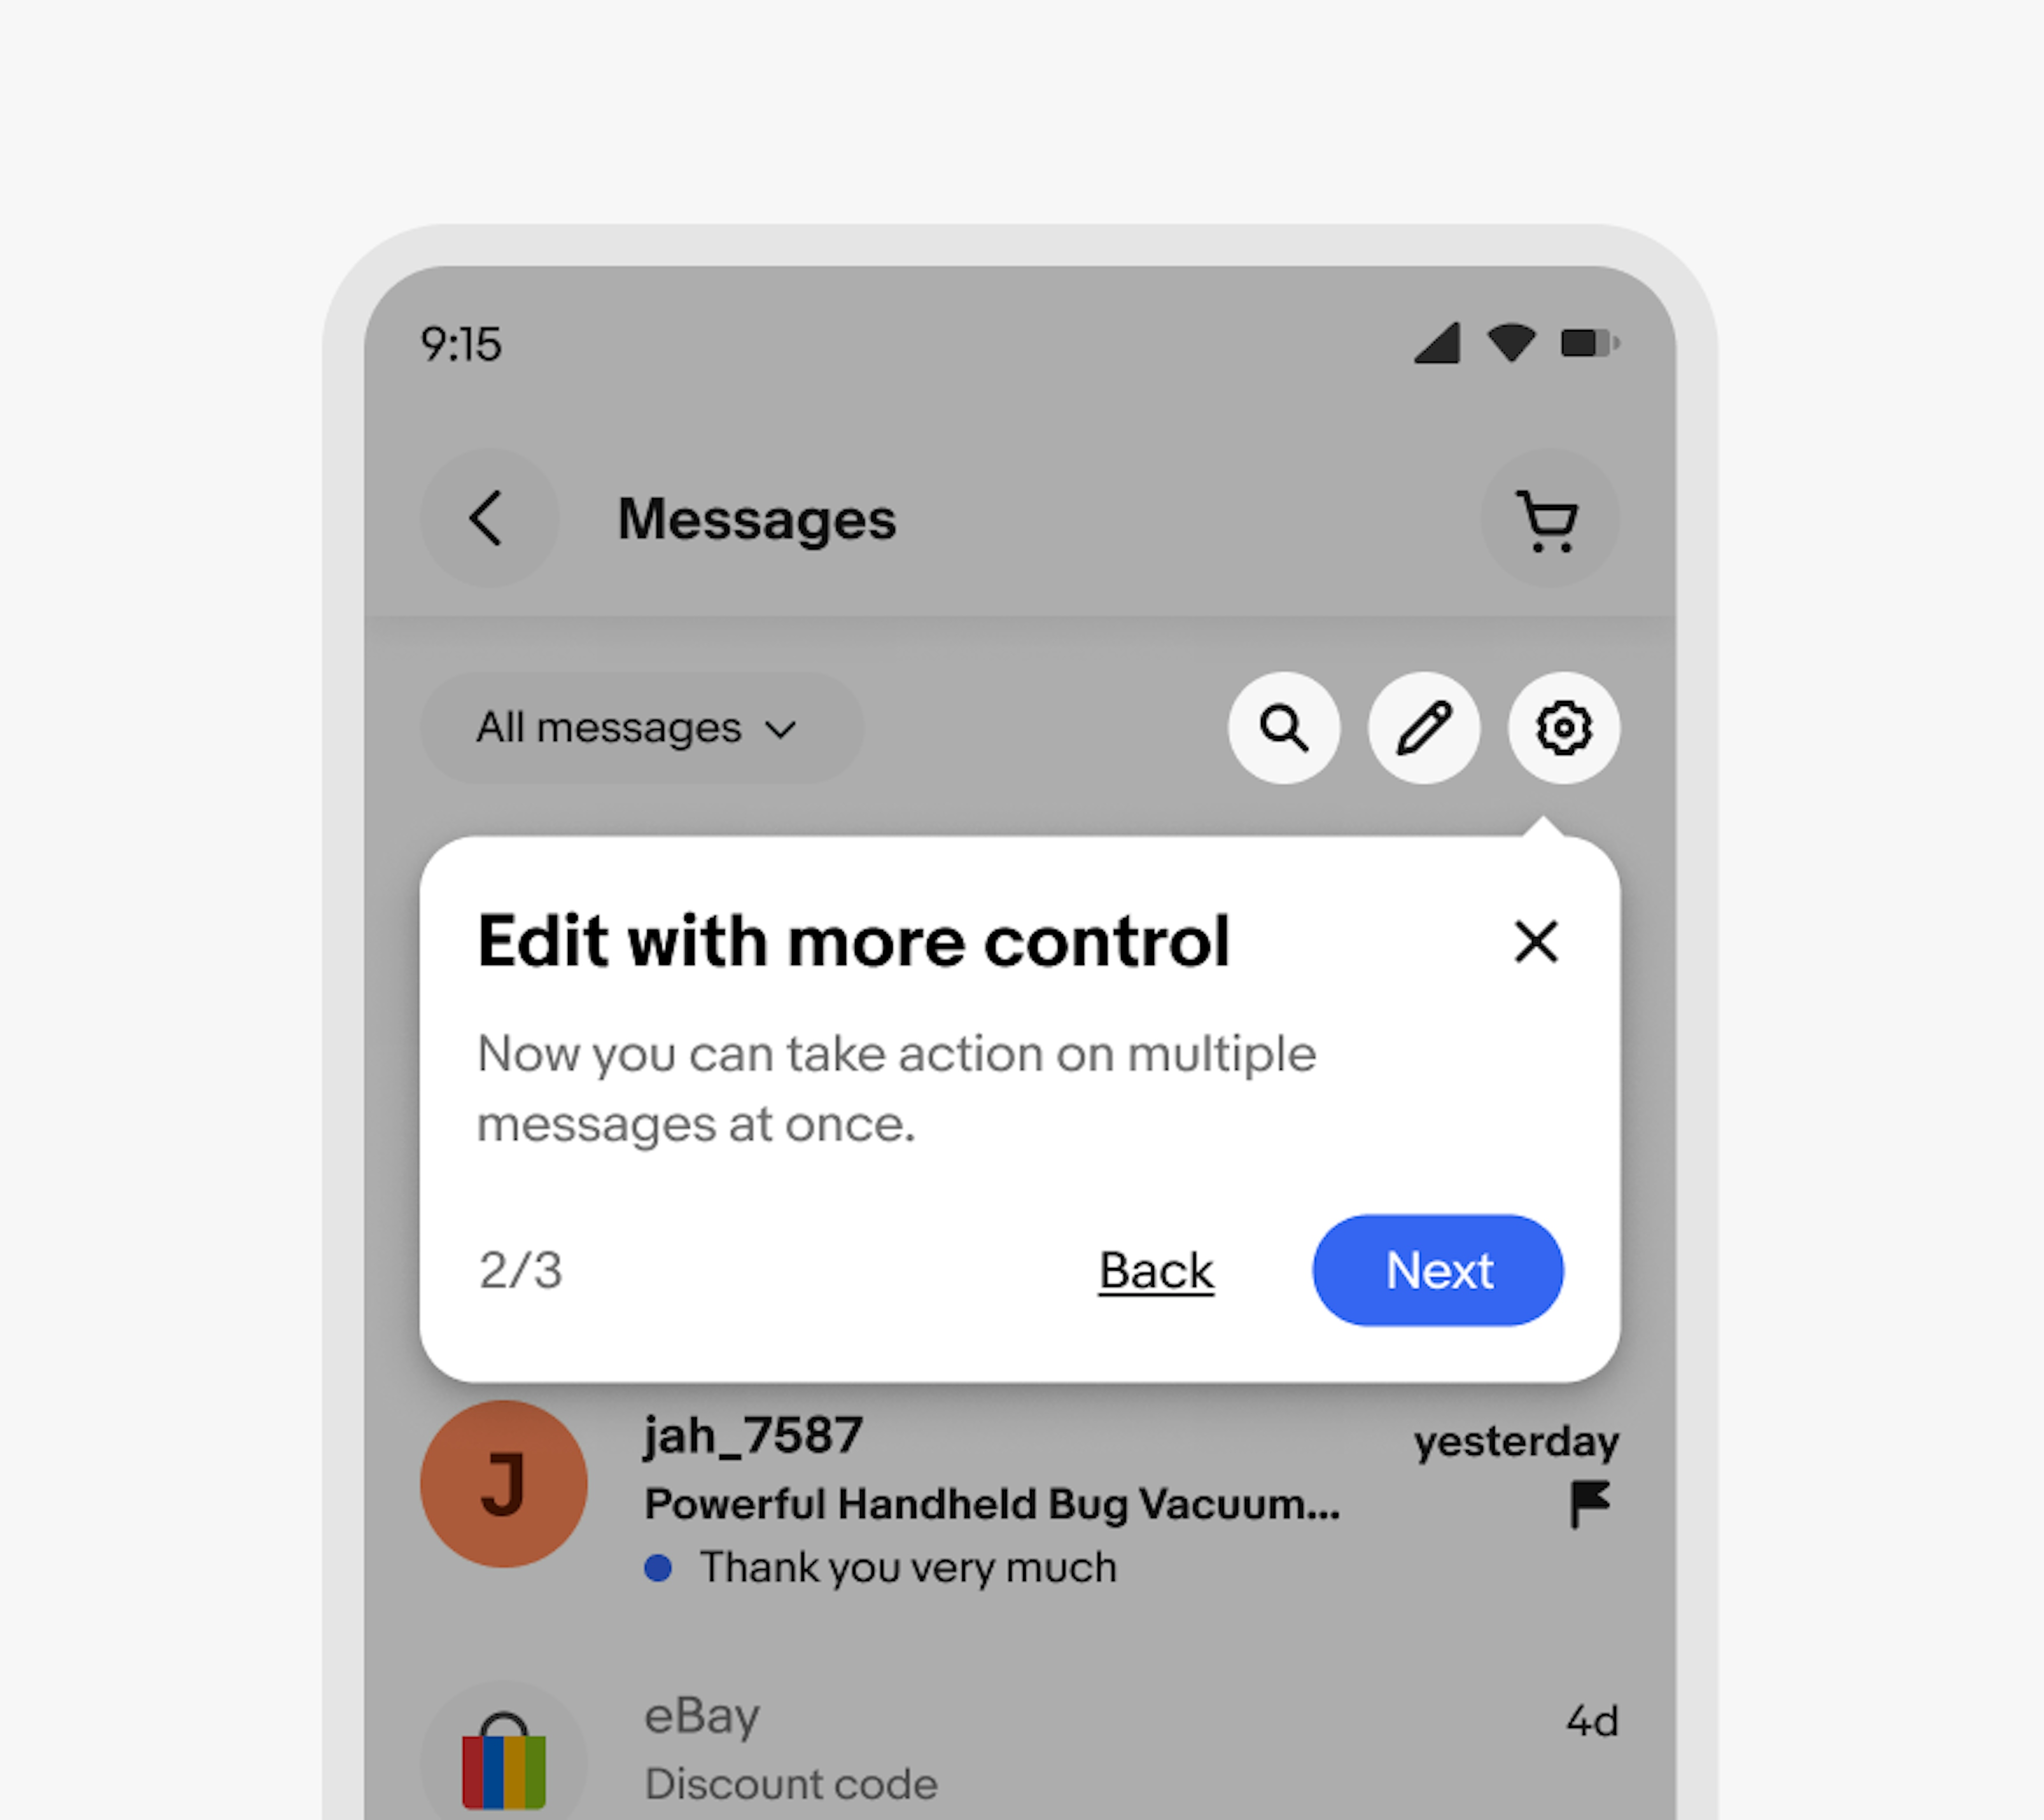 A mobile design with a tourtip. The tourtip has the title “Edit with more control” and points to three icons that are isolated. The icon buttons contain search, edit, and settings icons.